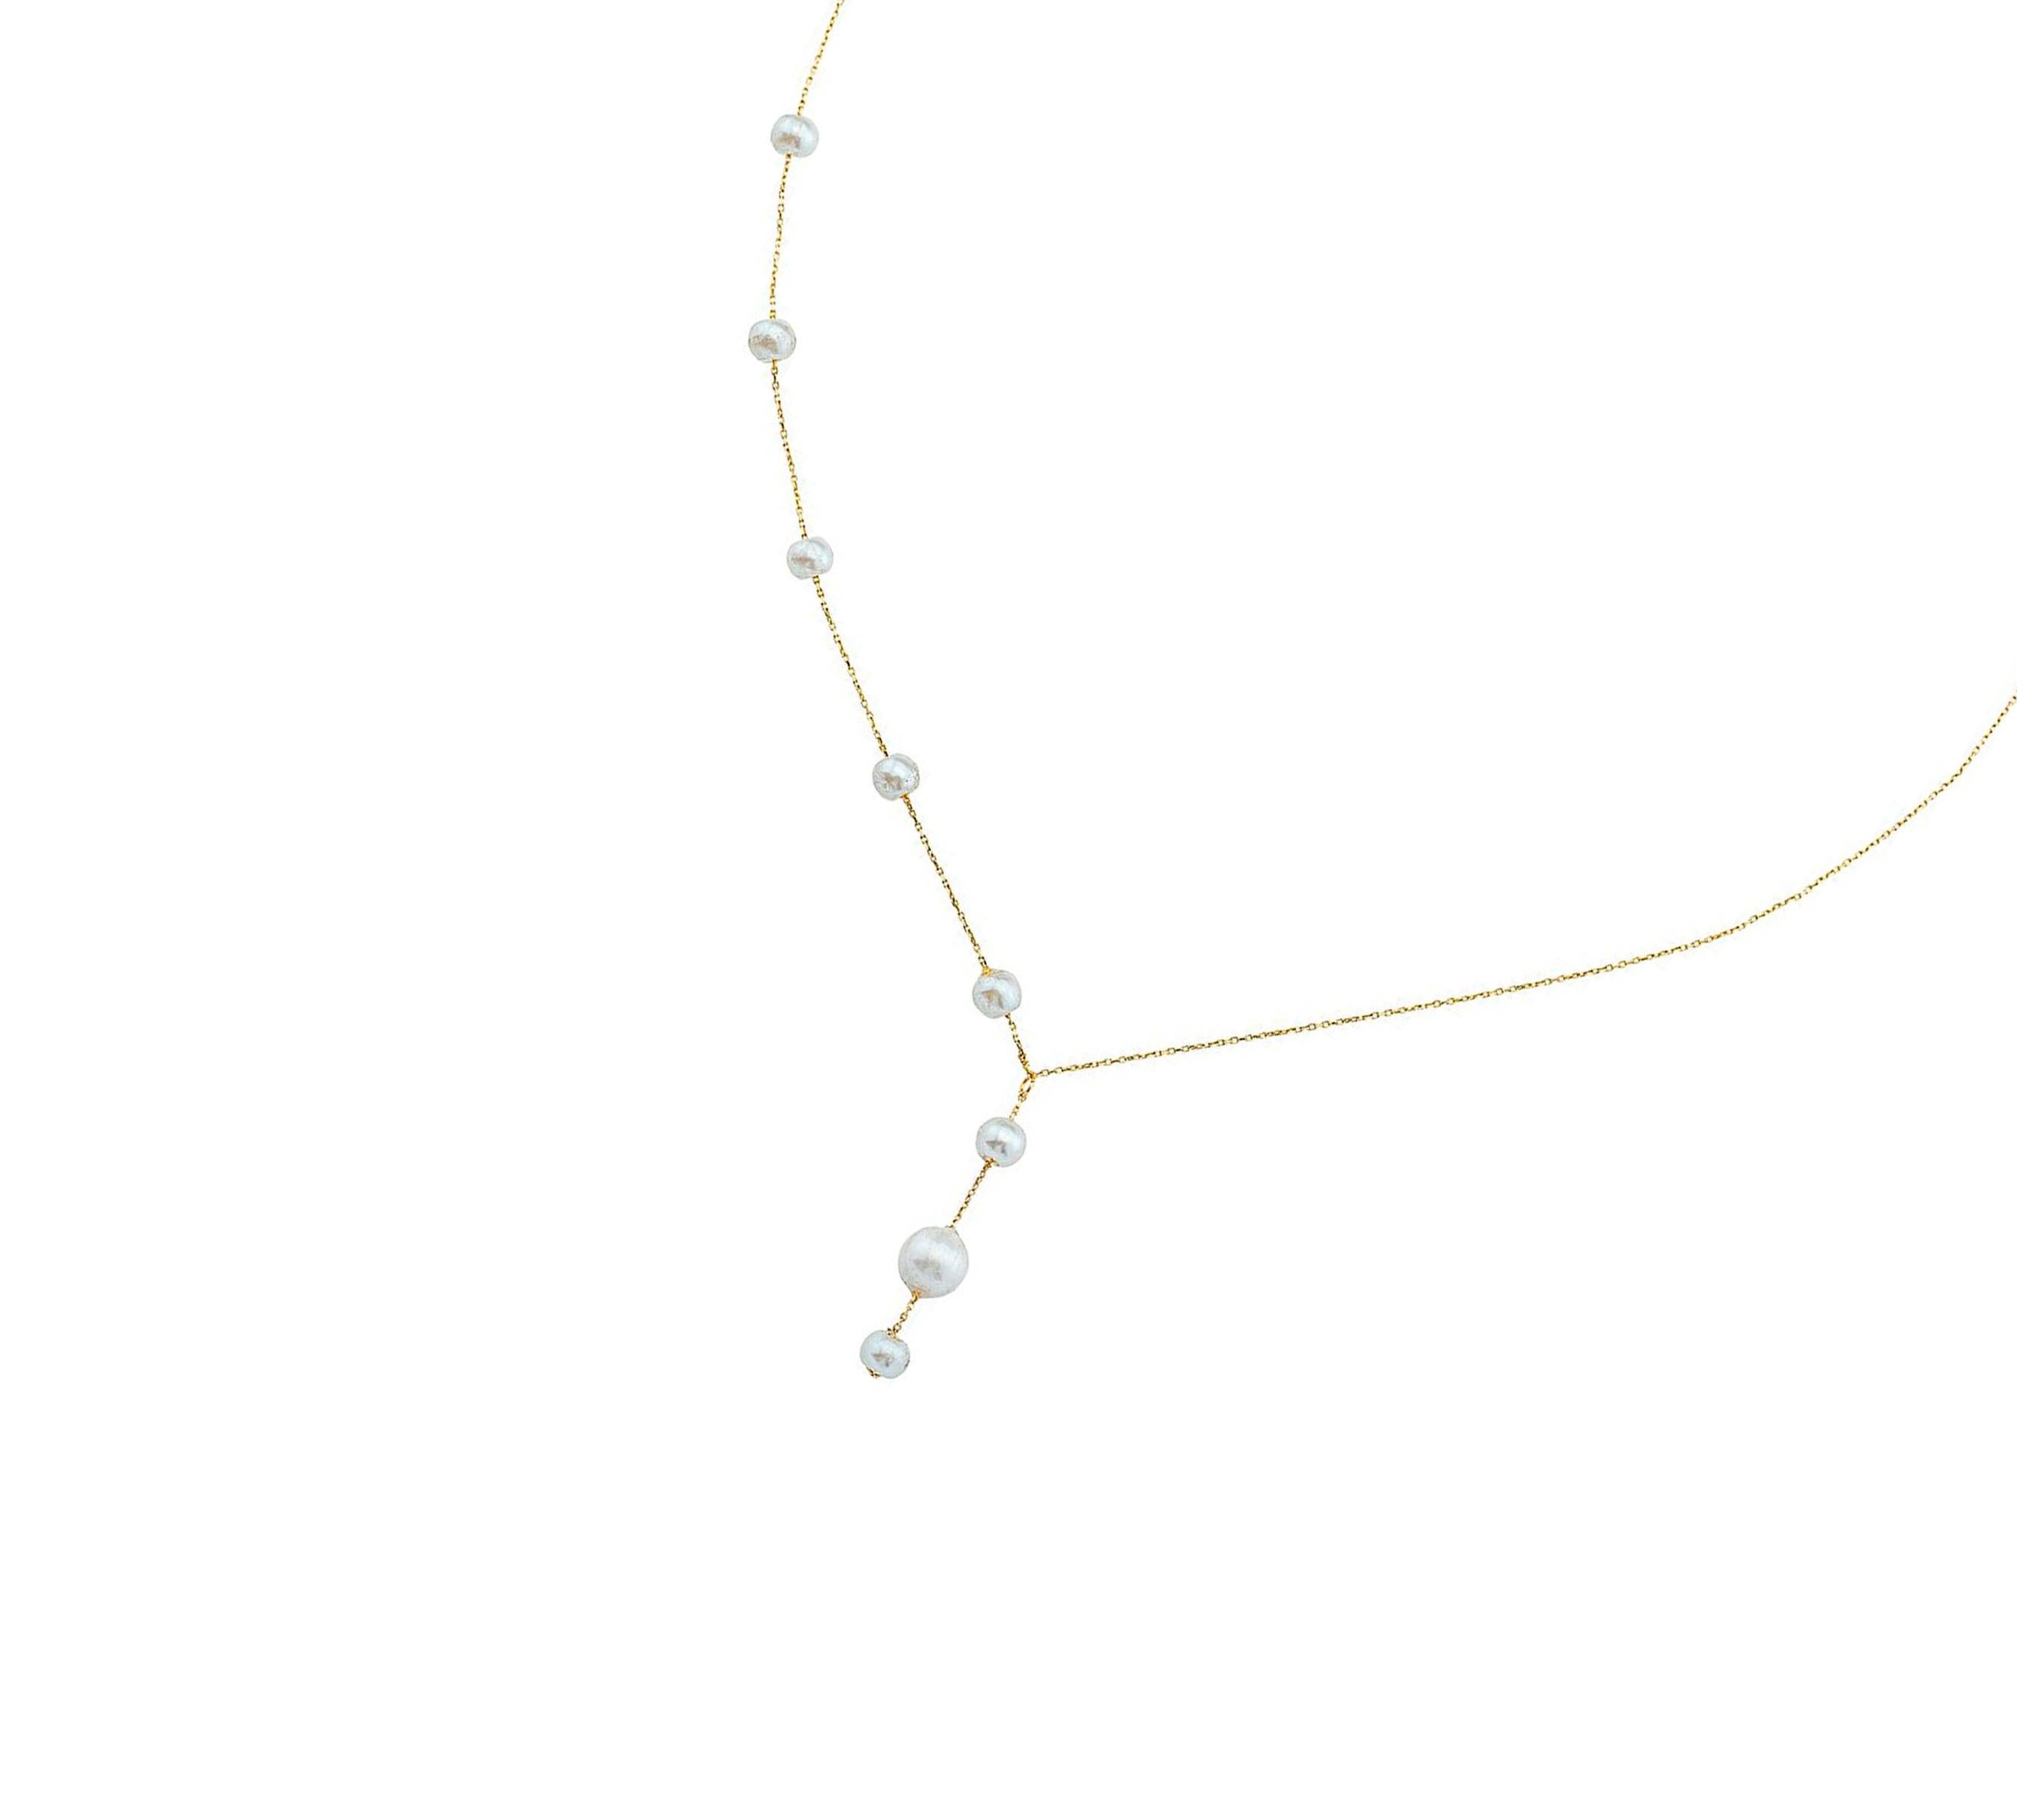 Modern Freshwater Pearls in 14 Karat Gold Chain Necklace, Pearl Necklace